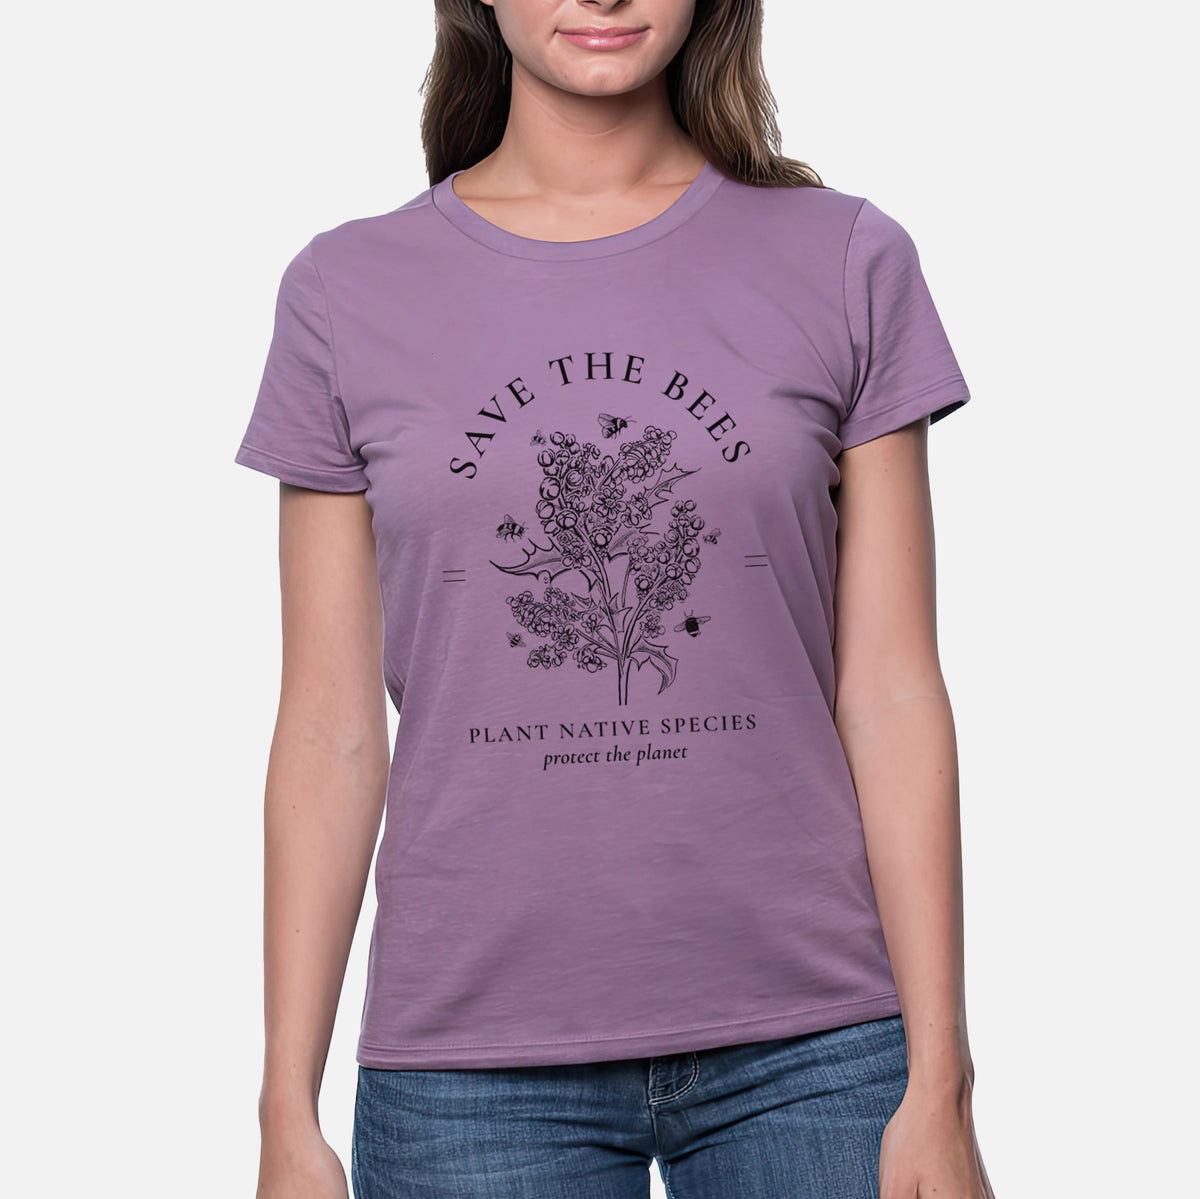 Save the Bees - Plant Native Species - Women&#39;s Crewneck - Made in USA - 100% Organic Cotton